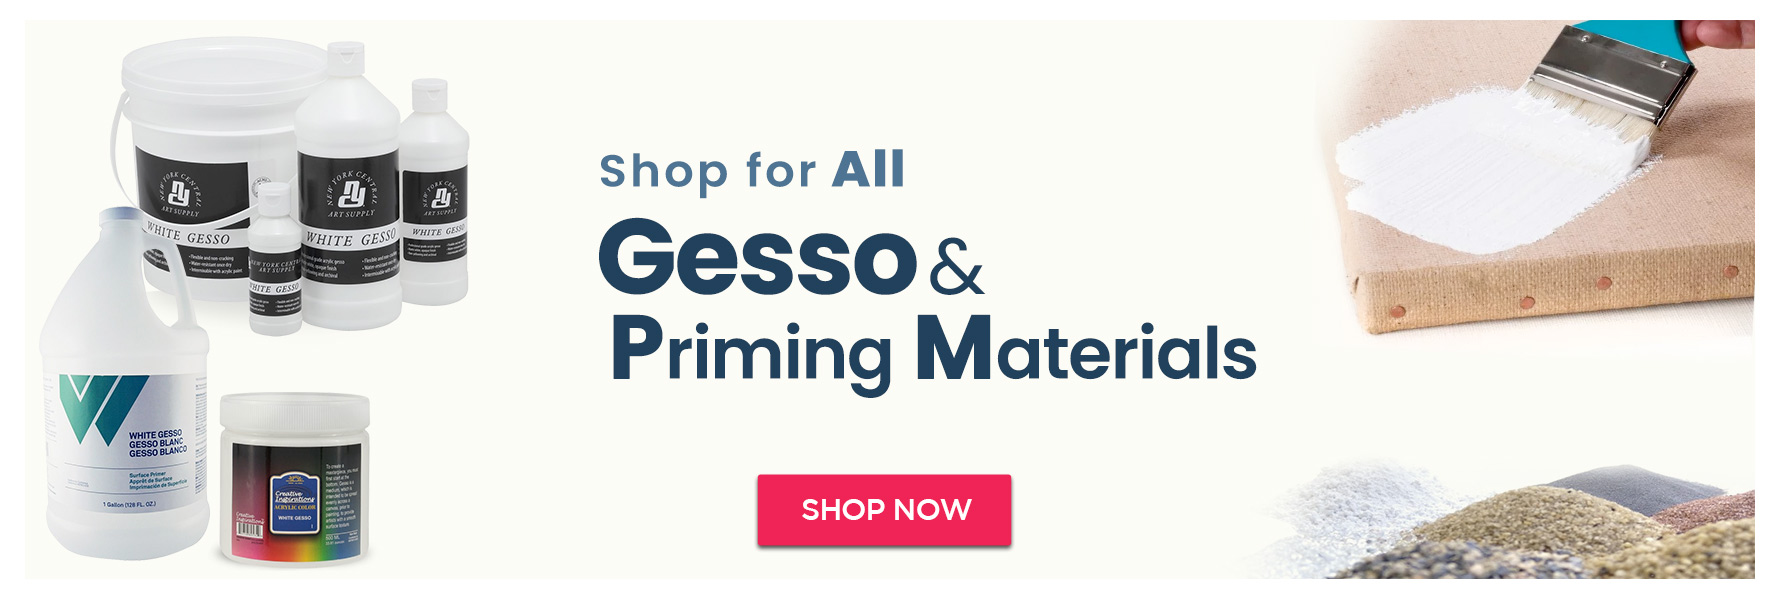 Shop for Gesso and Primers on Sale